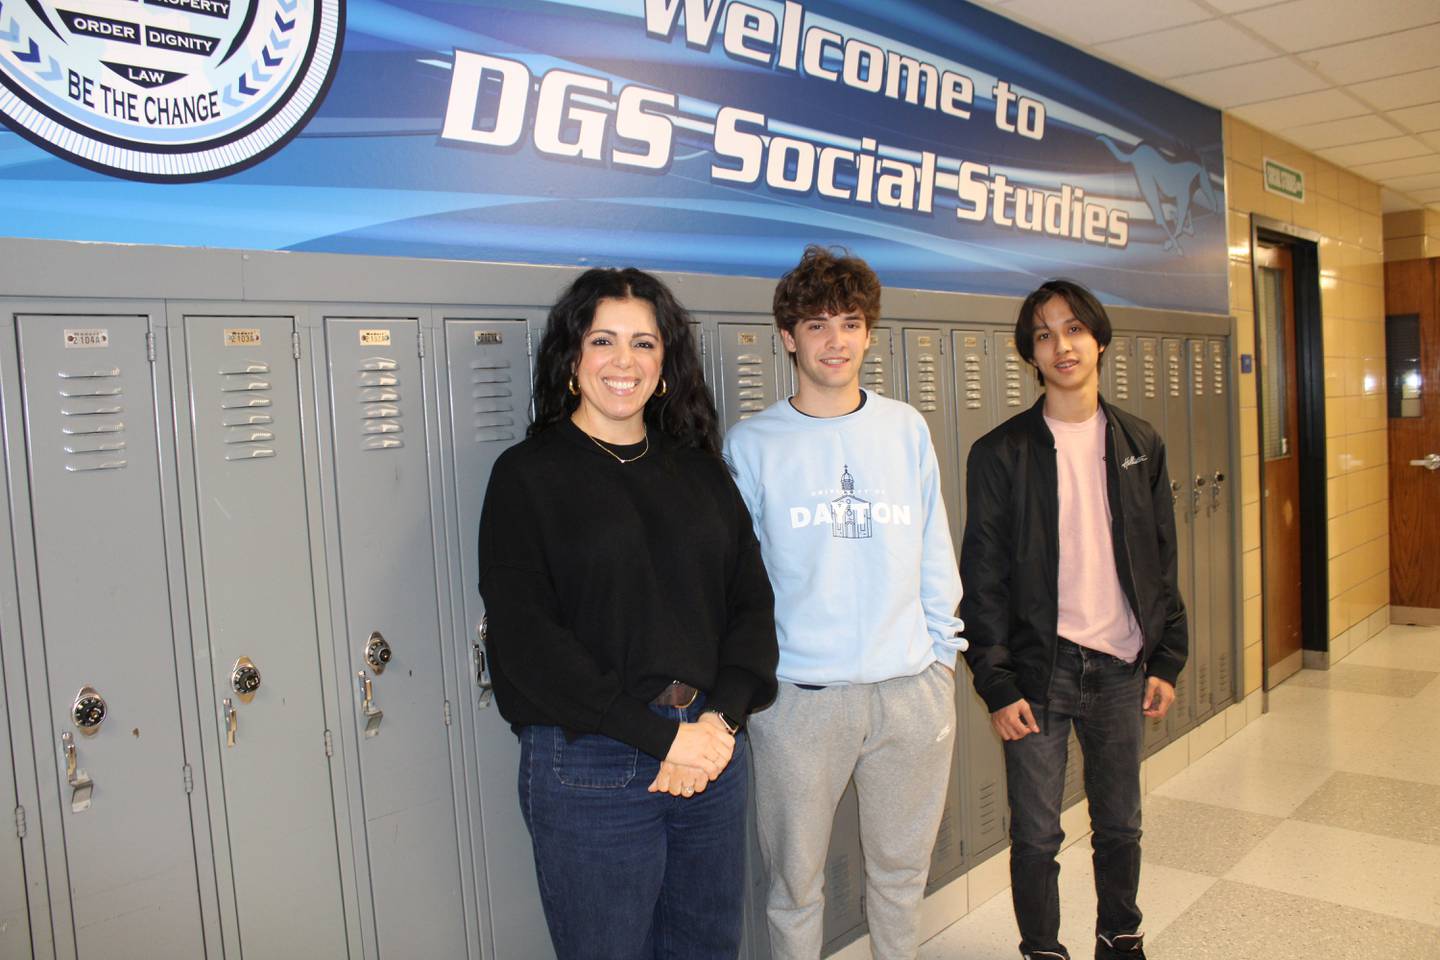 South High Third Place Winners (L-R): South High economics teacher Elaine Marinakos with Jake Justus and Robert Vong (stock market game)